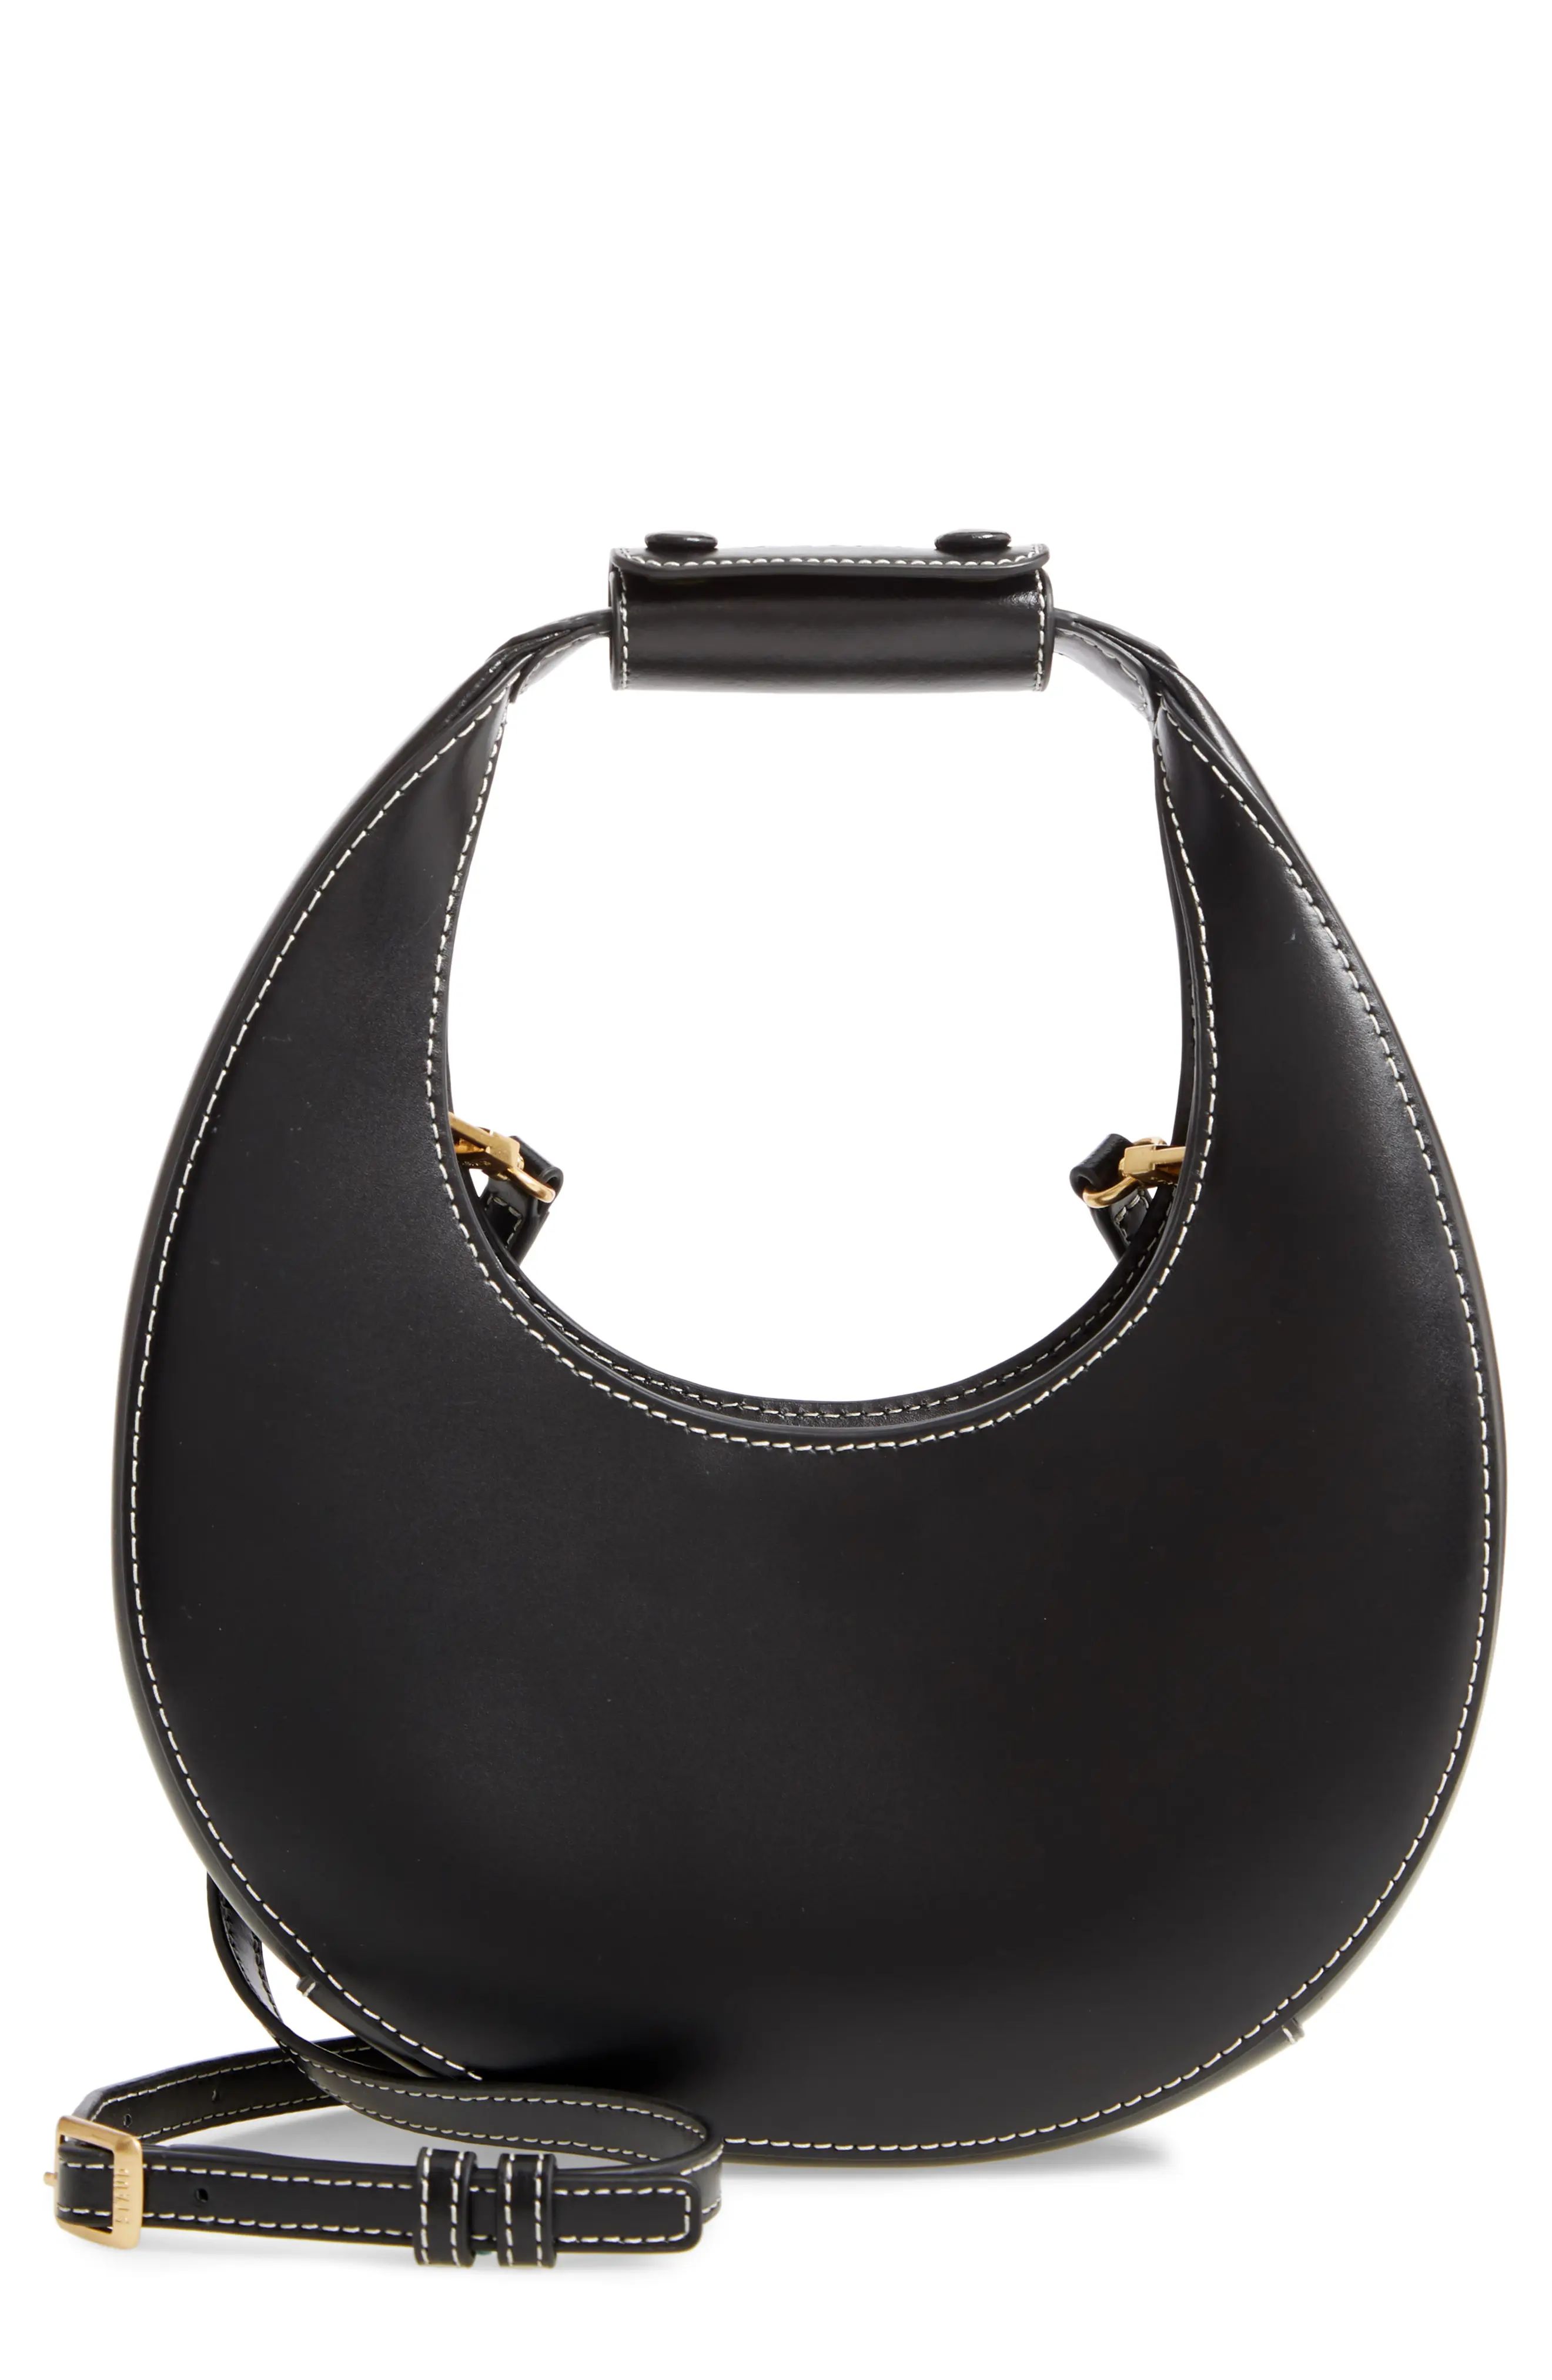 STAUD Mini Moon Leather Bag in Black at Nordstrom | Nordstrom